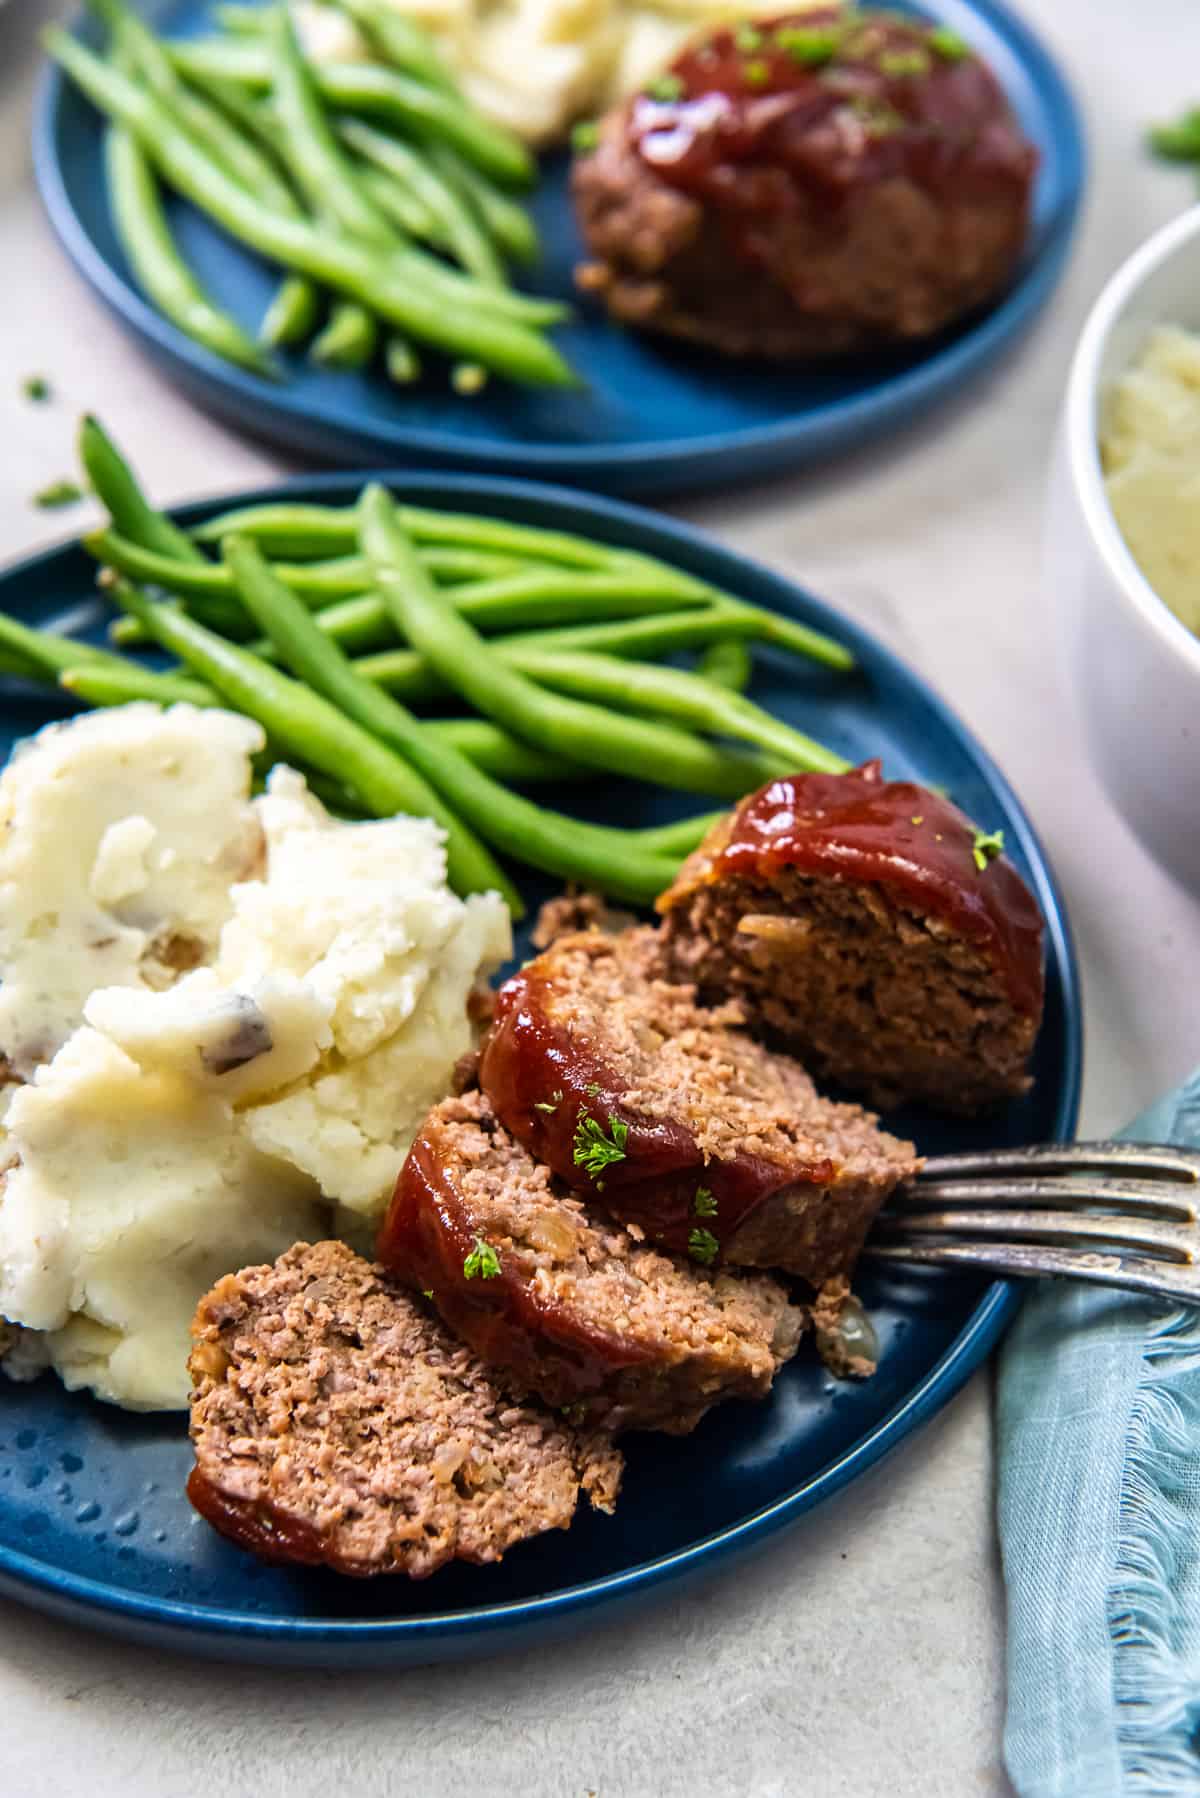 Slices of meatloaf on a blue plate with mashed potatoes and green beans.